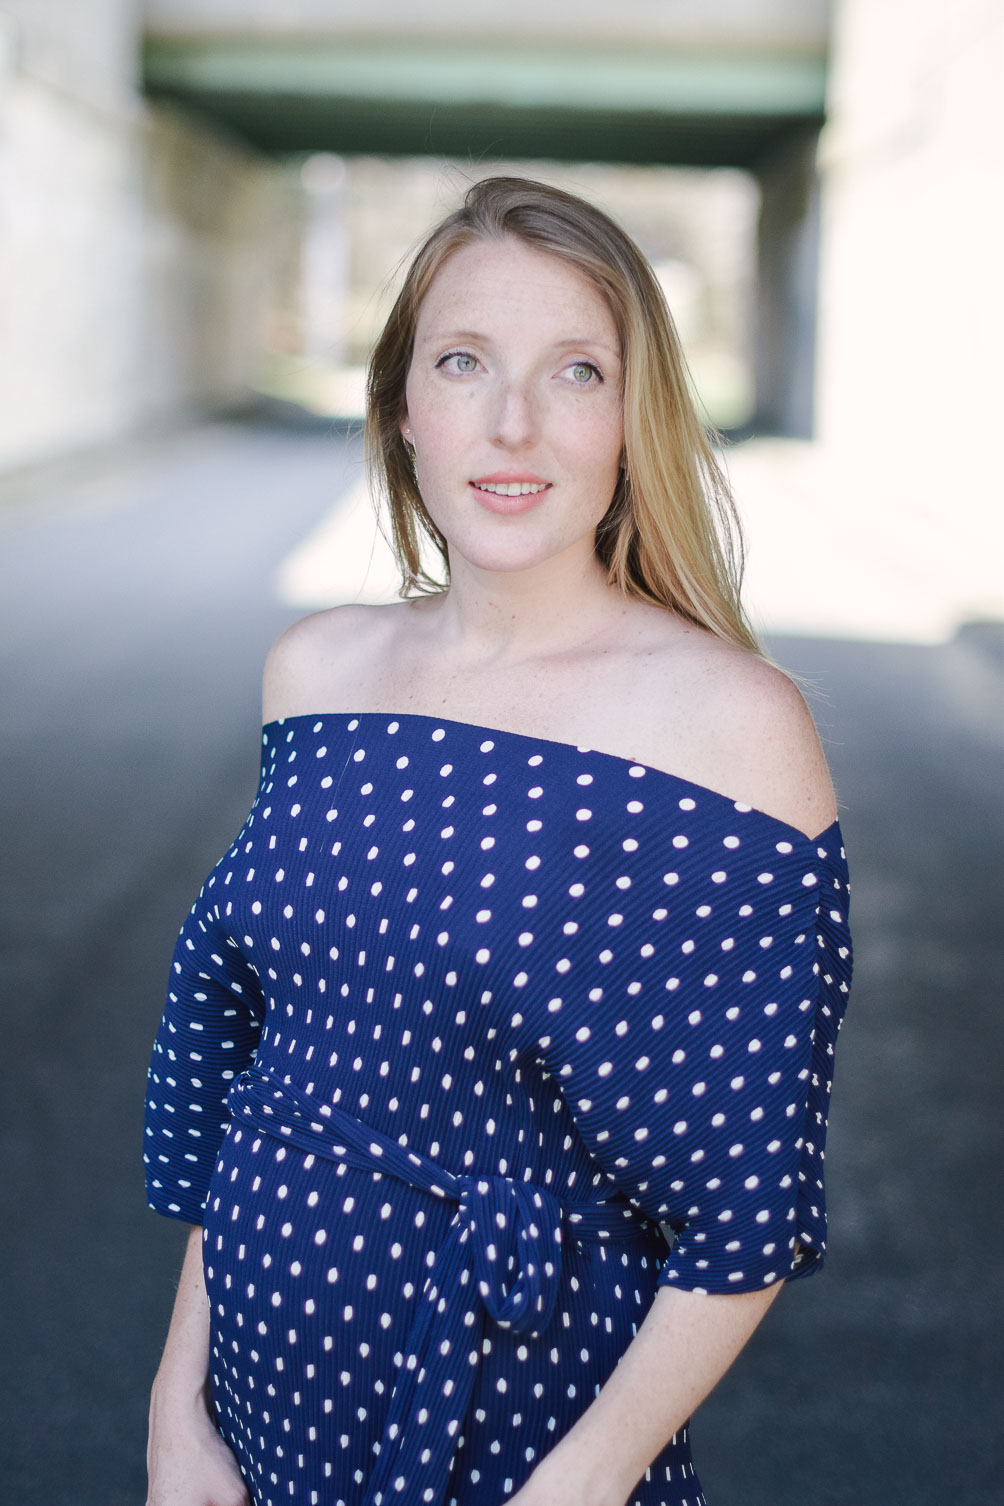 wearing spring maternity style with an off shoulder dress in polka dots